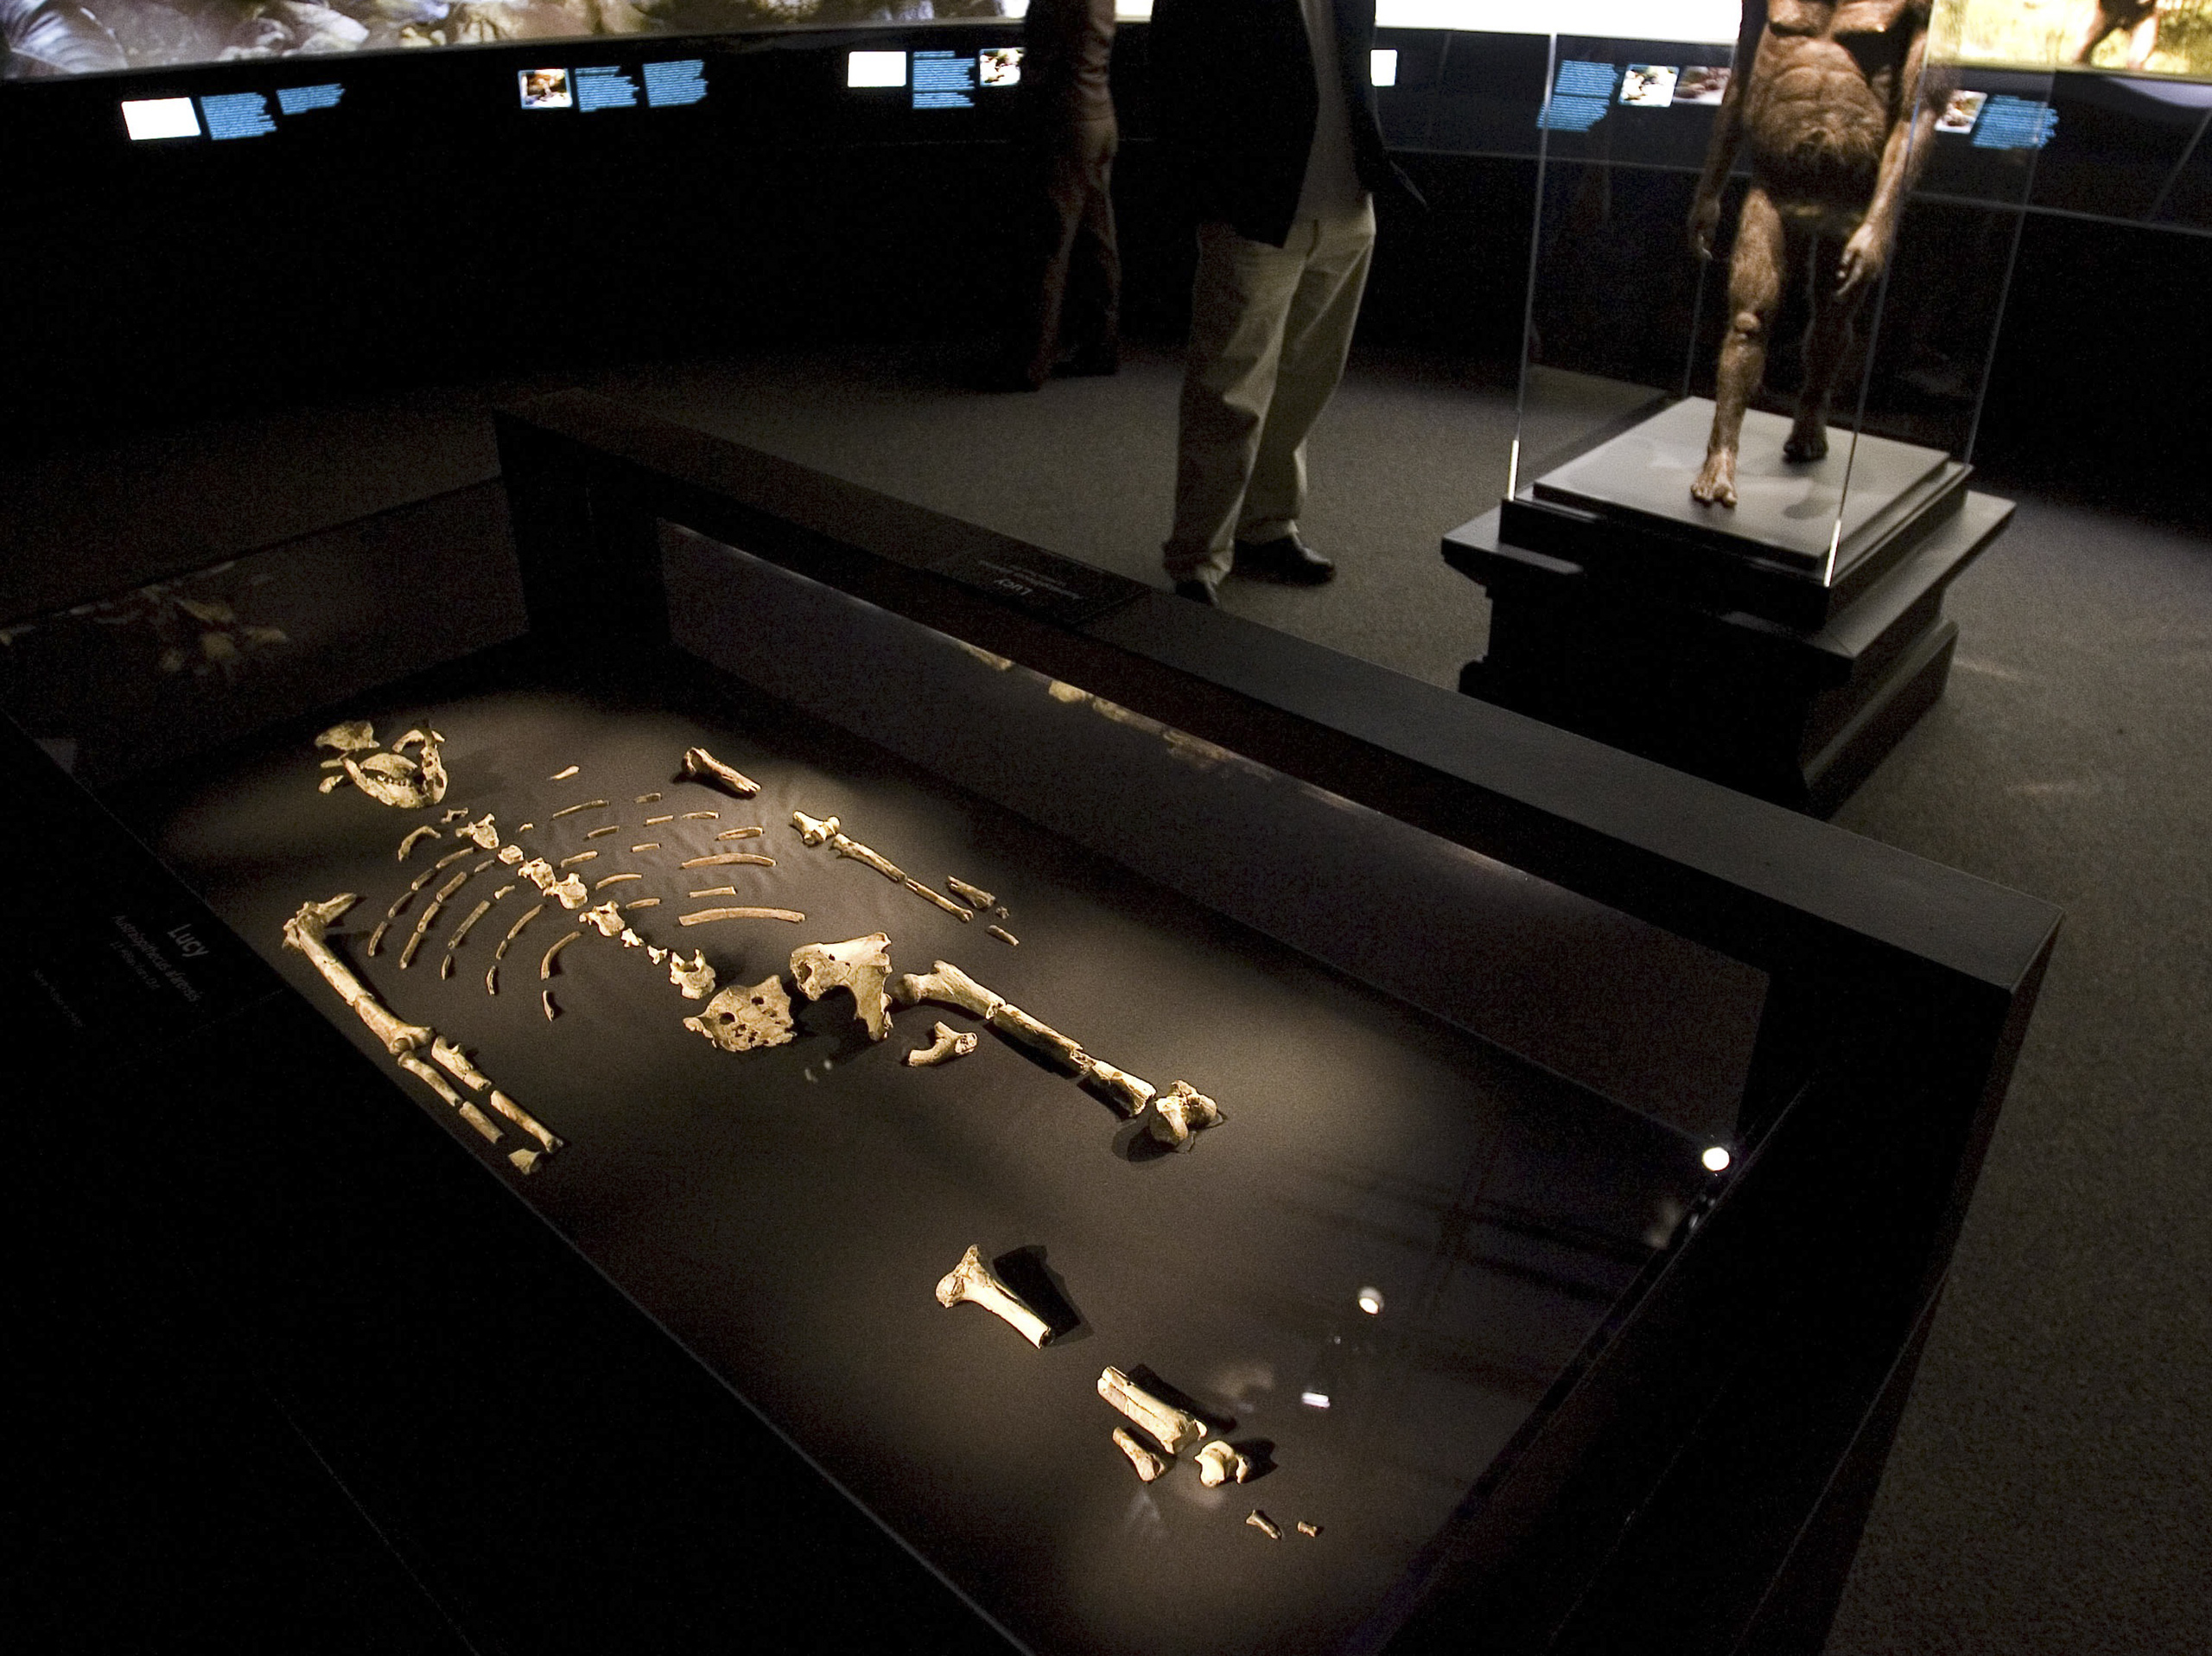 The 3.2 million year old fossilized remains of "Lucy", the most complete example of the hominid Australopithecus afarensis, is displayed at the Houston Museum of Natural Science in Houston on Aug. 28, 2007. (Dave Einsel—Getty Images)